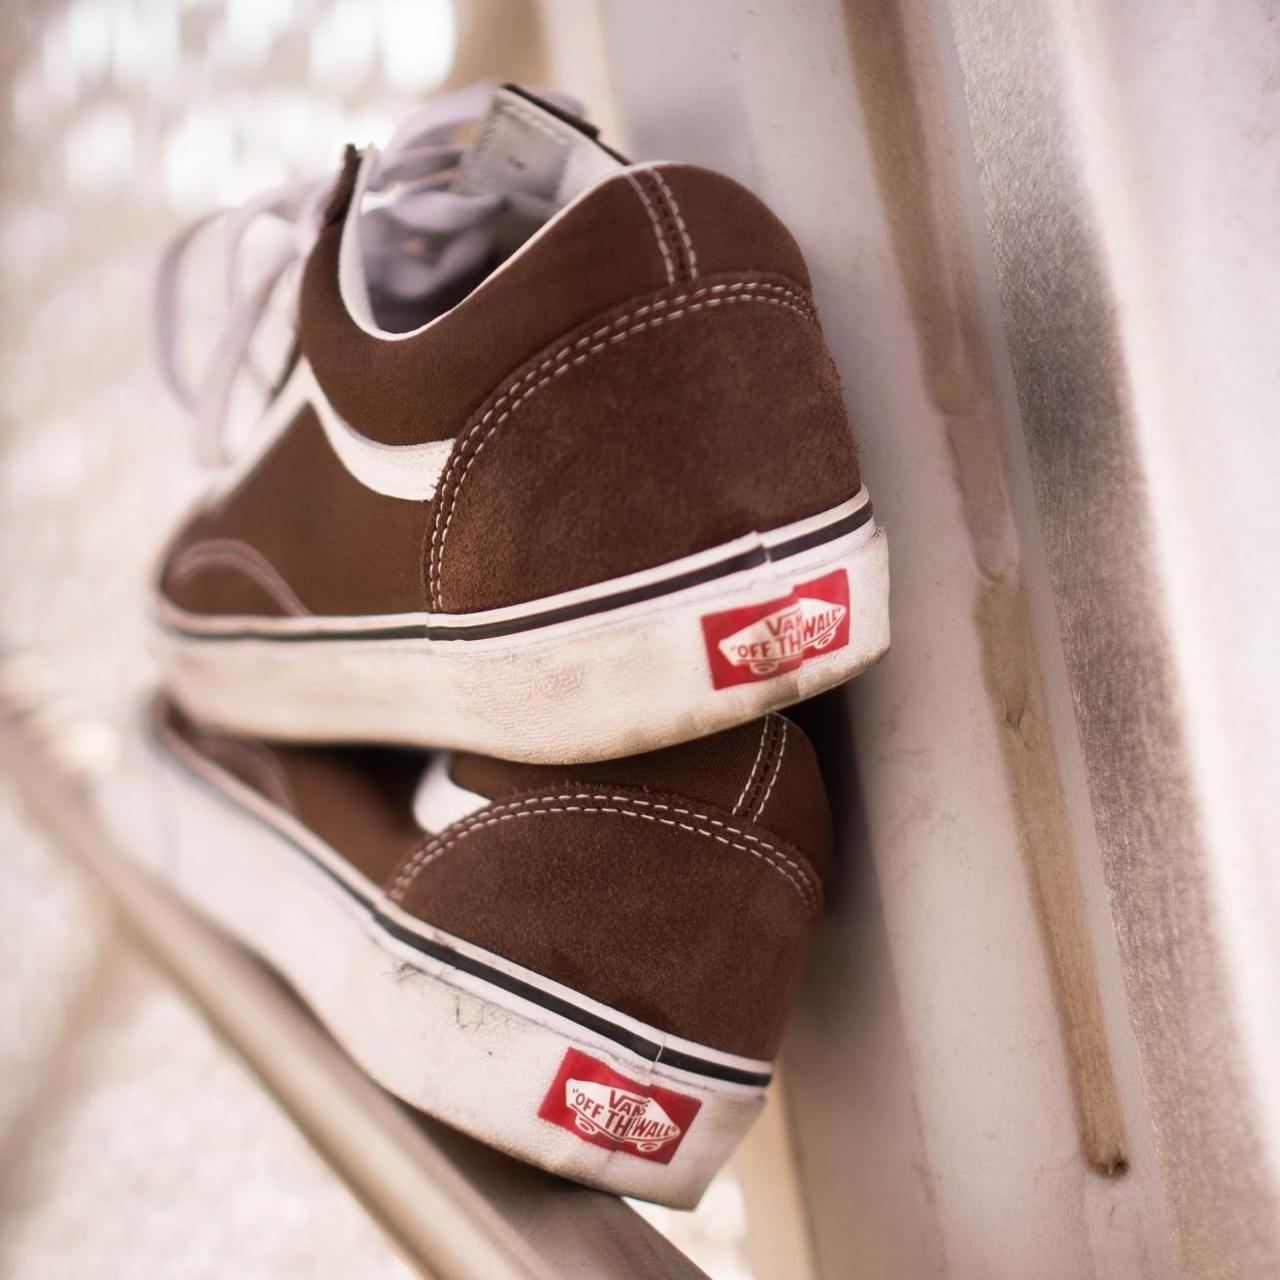 Vans Men's Brown and White Trainers (3)